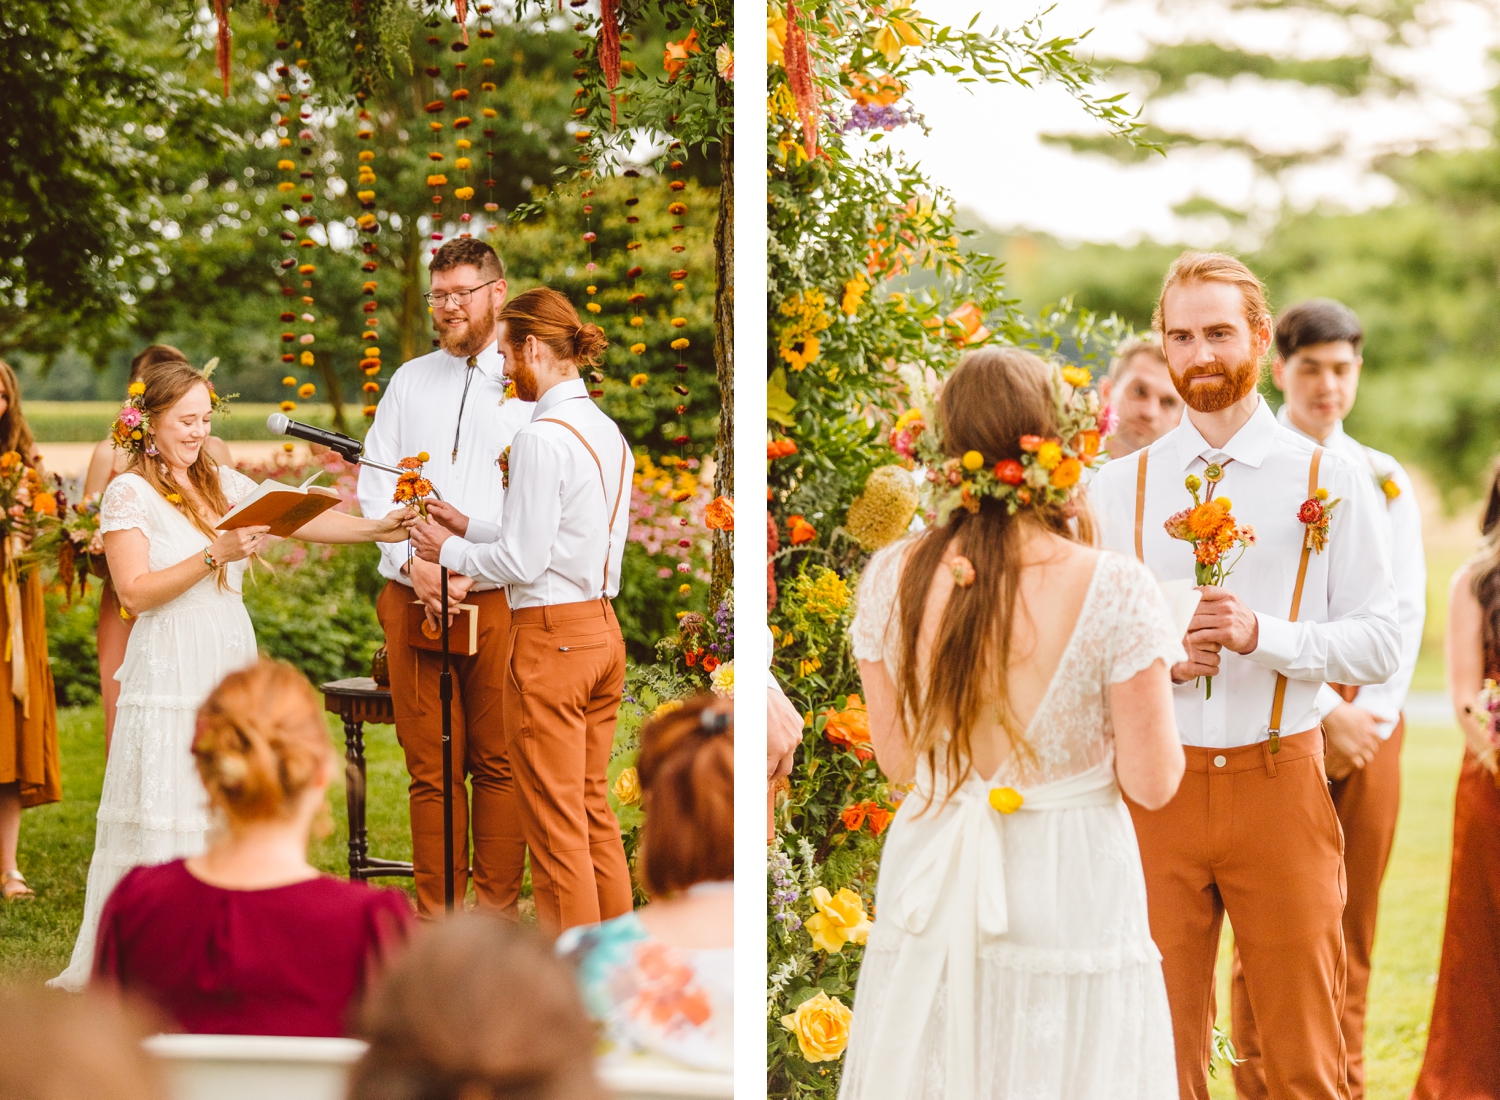 Bride sharing vows while handing flowers to groom | groom holding bouquet during vows | Brooke Michelle Photography